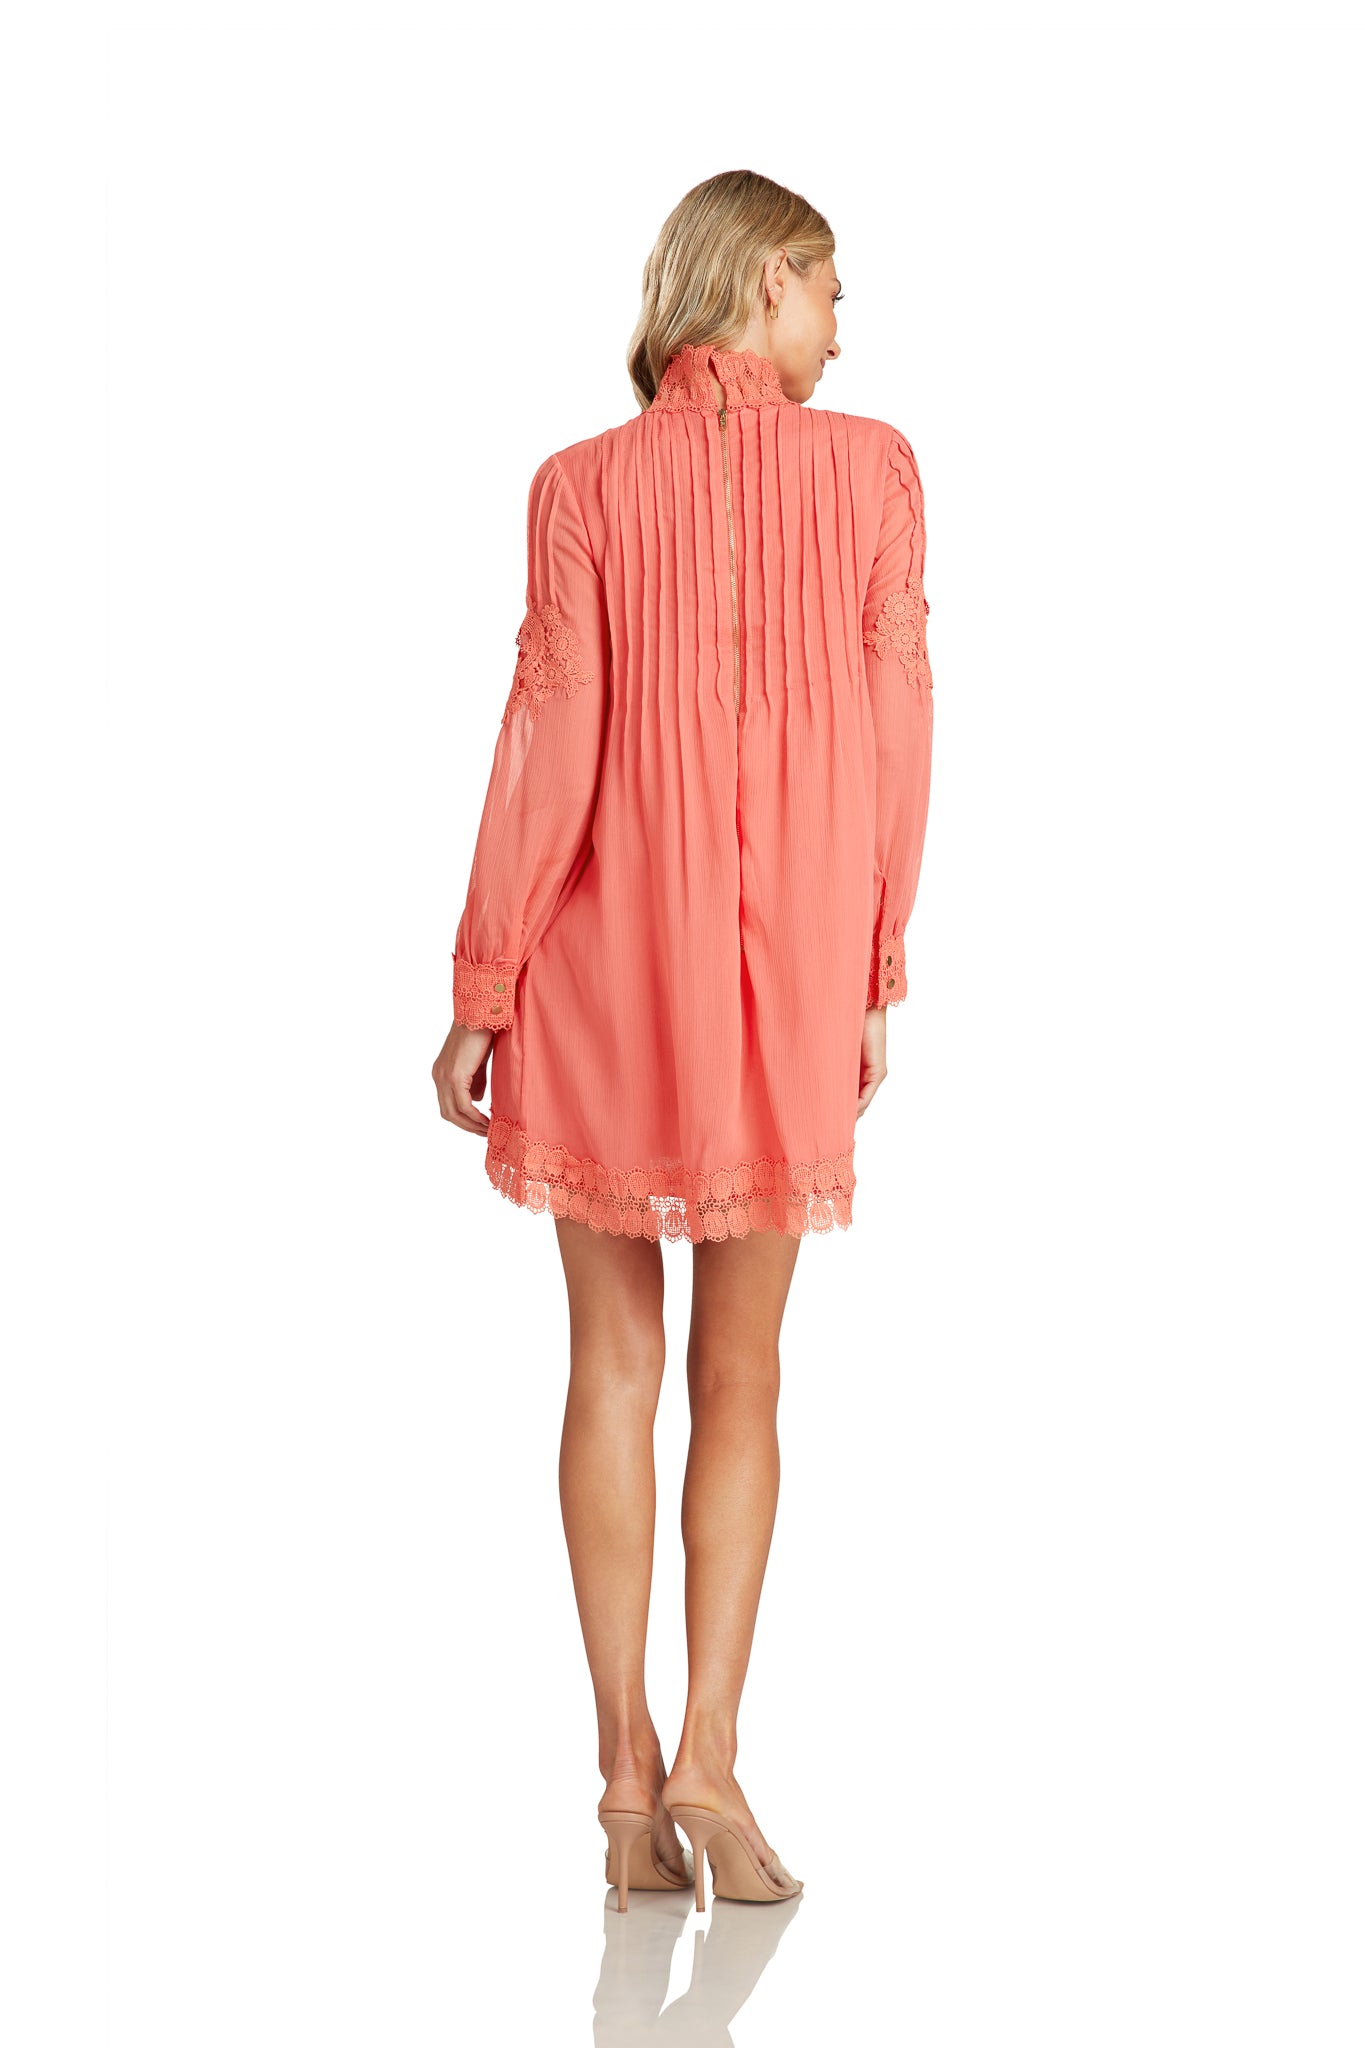 SPRING DRESS EVENT NATALIE TUNIC DRESS CORAL